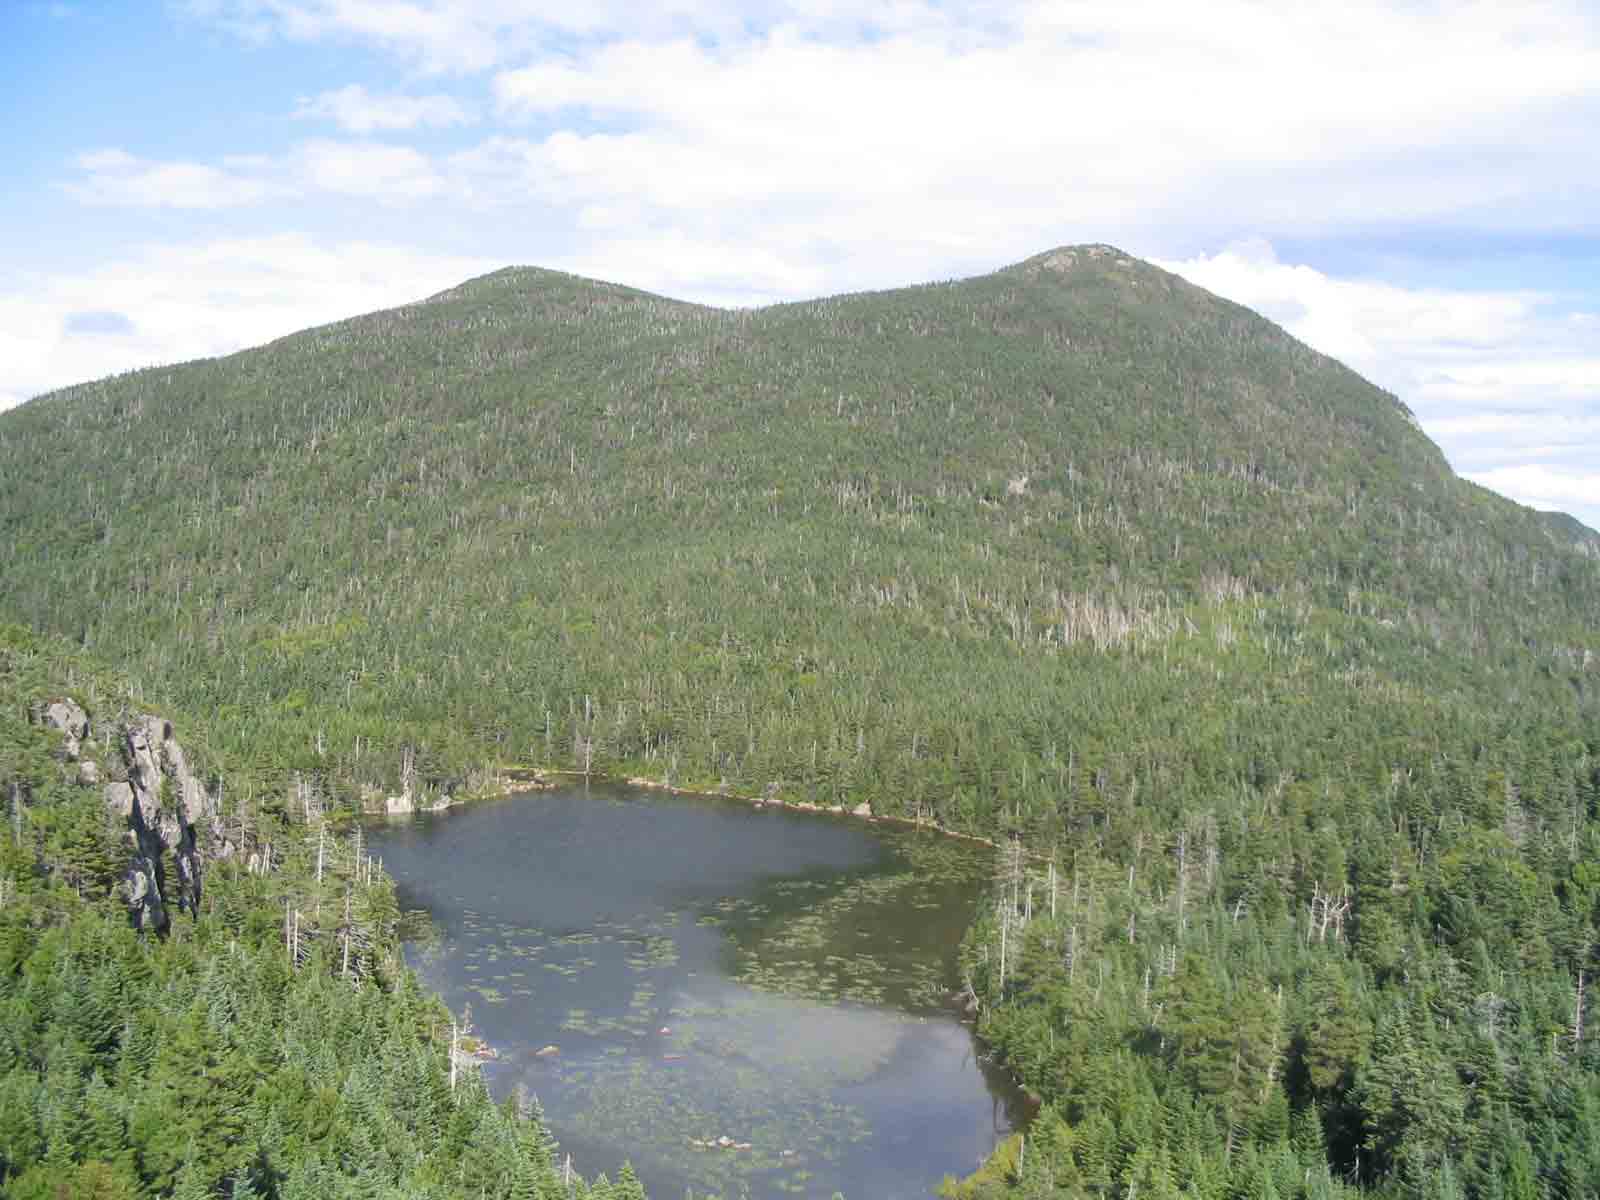 31.9 MM. What an awesome view of tranquil Horns Pond below you and the two Horns (North and South) beyond. This 50 yard short spur for this view is well worth the side trip. Many backpackers and moose love to stay at the scenic Horns Pond campsite located by the lake. Courtesy askus3@optonline.net